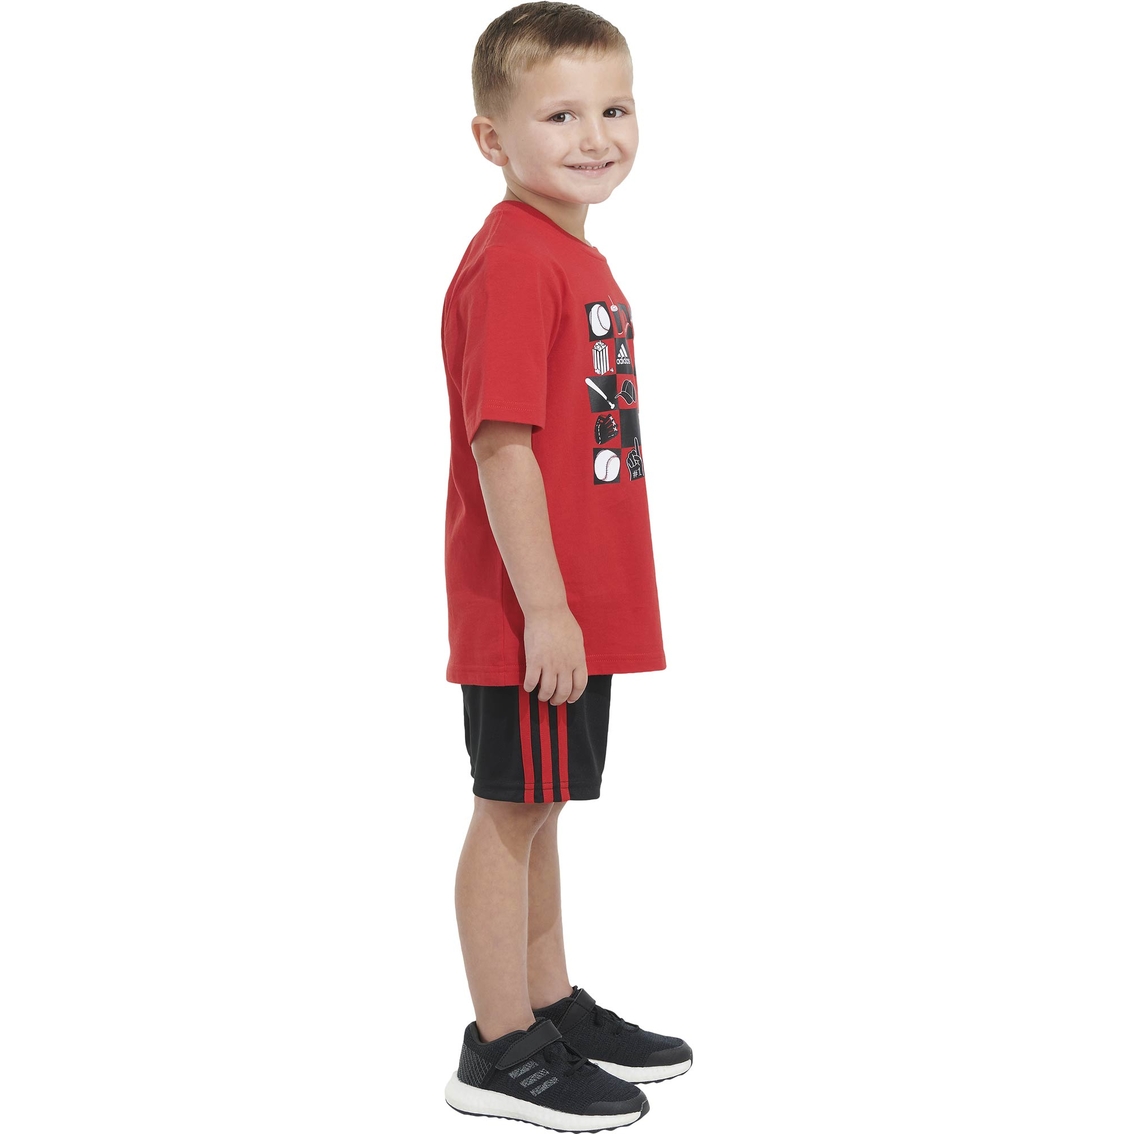 Adidas Toddler Boys Cotton Graphic Tee and Shorts Set - Image 5 of 7